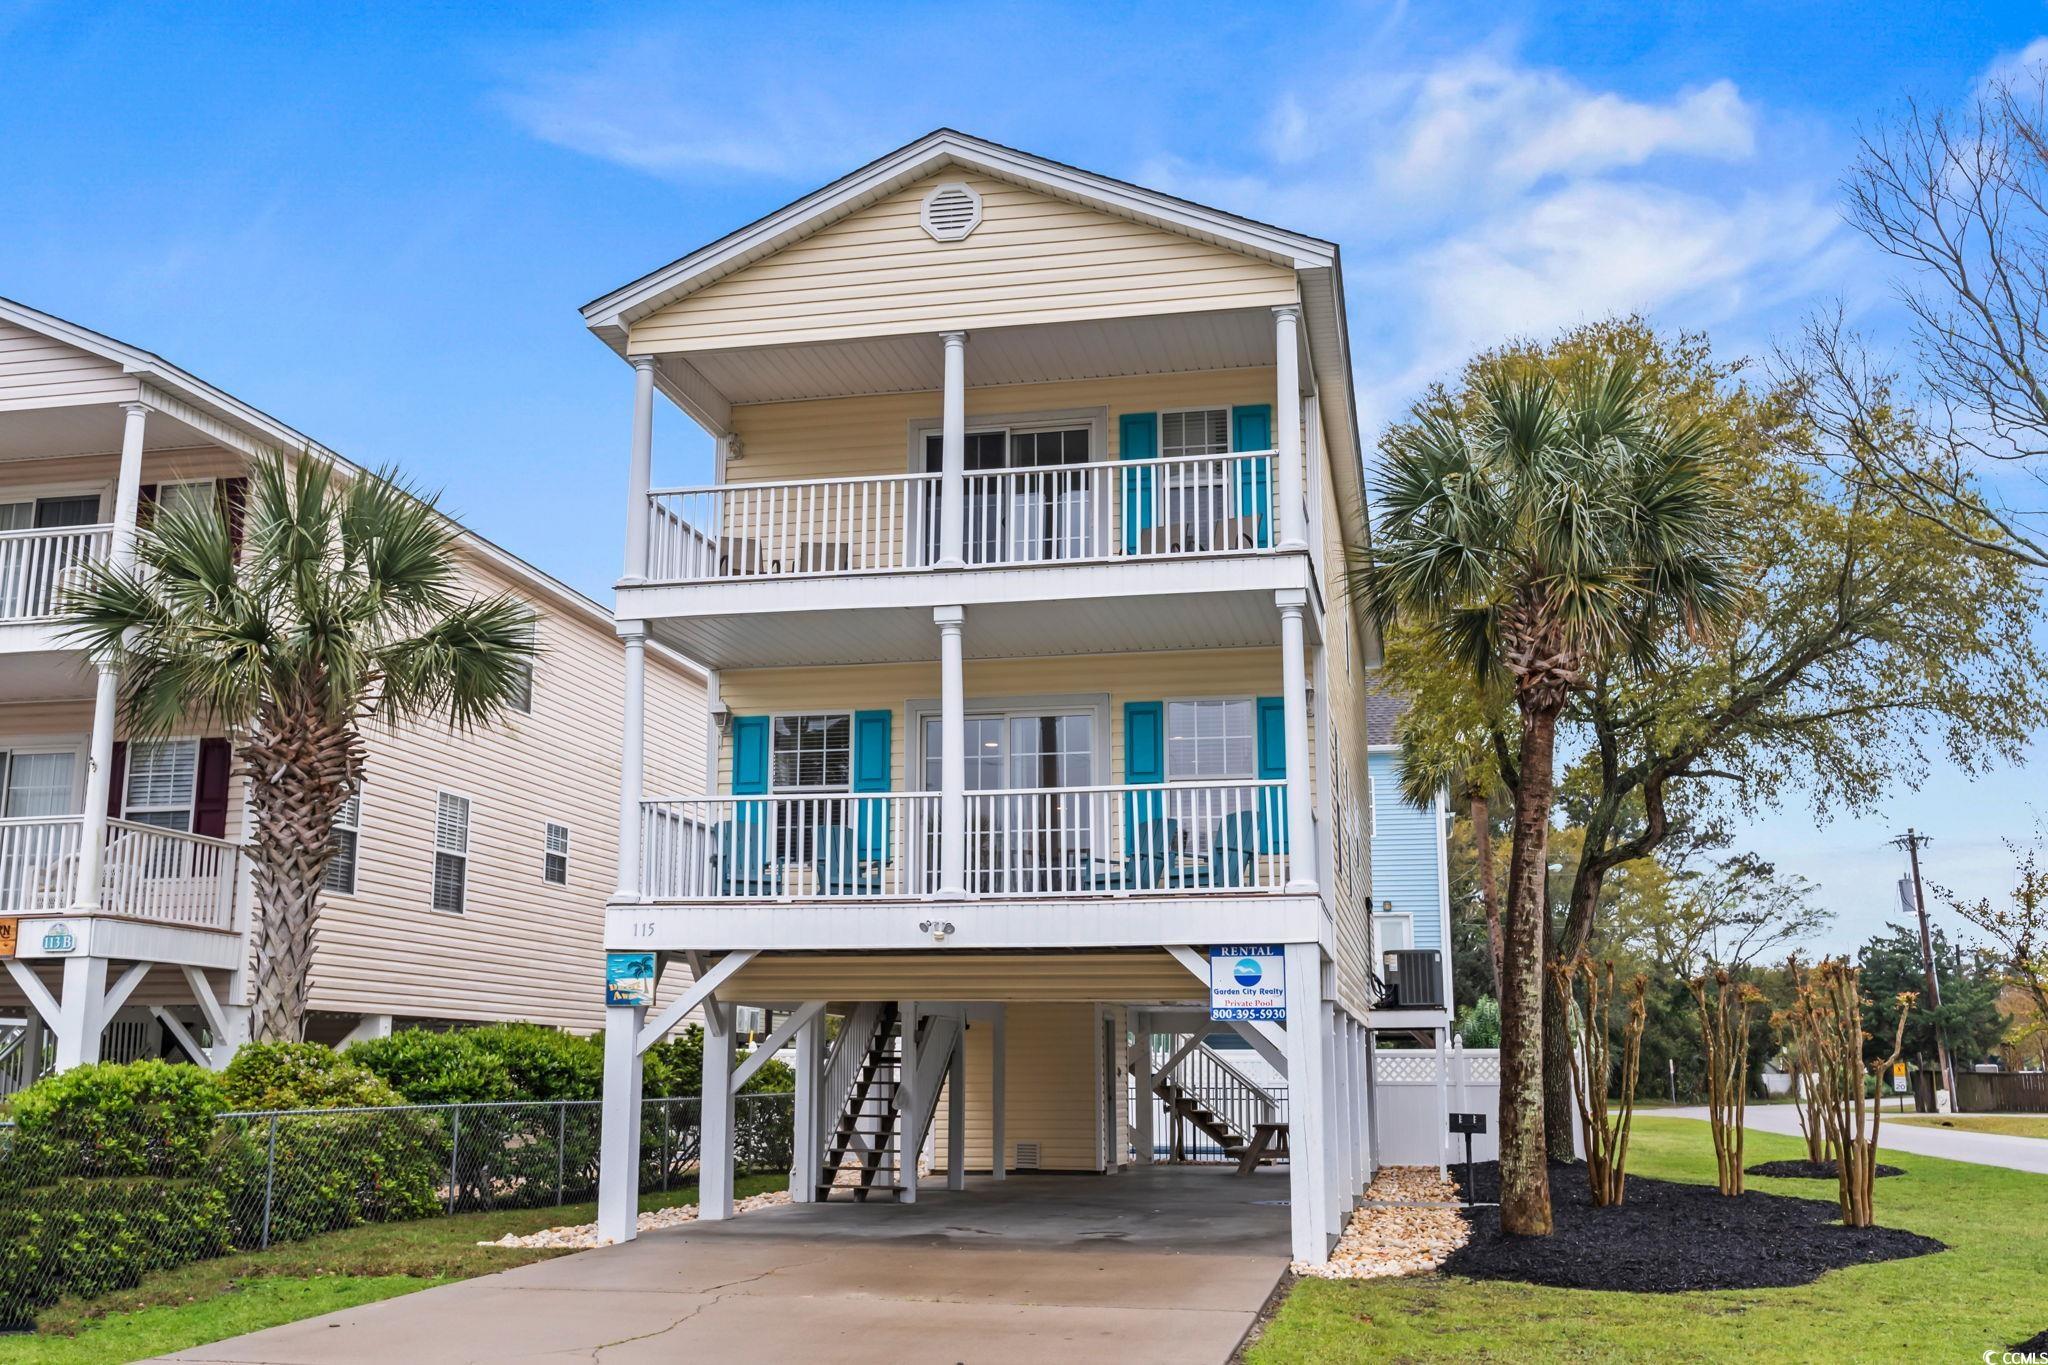 Photo of 115 S 5th Ave. S, Surfside Beach, SC 29575